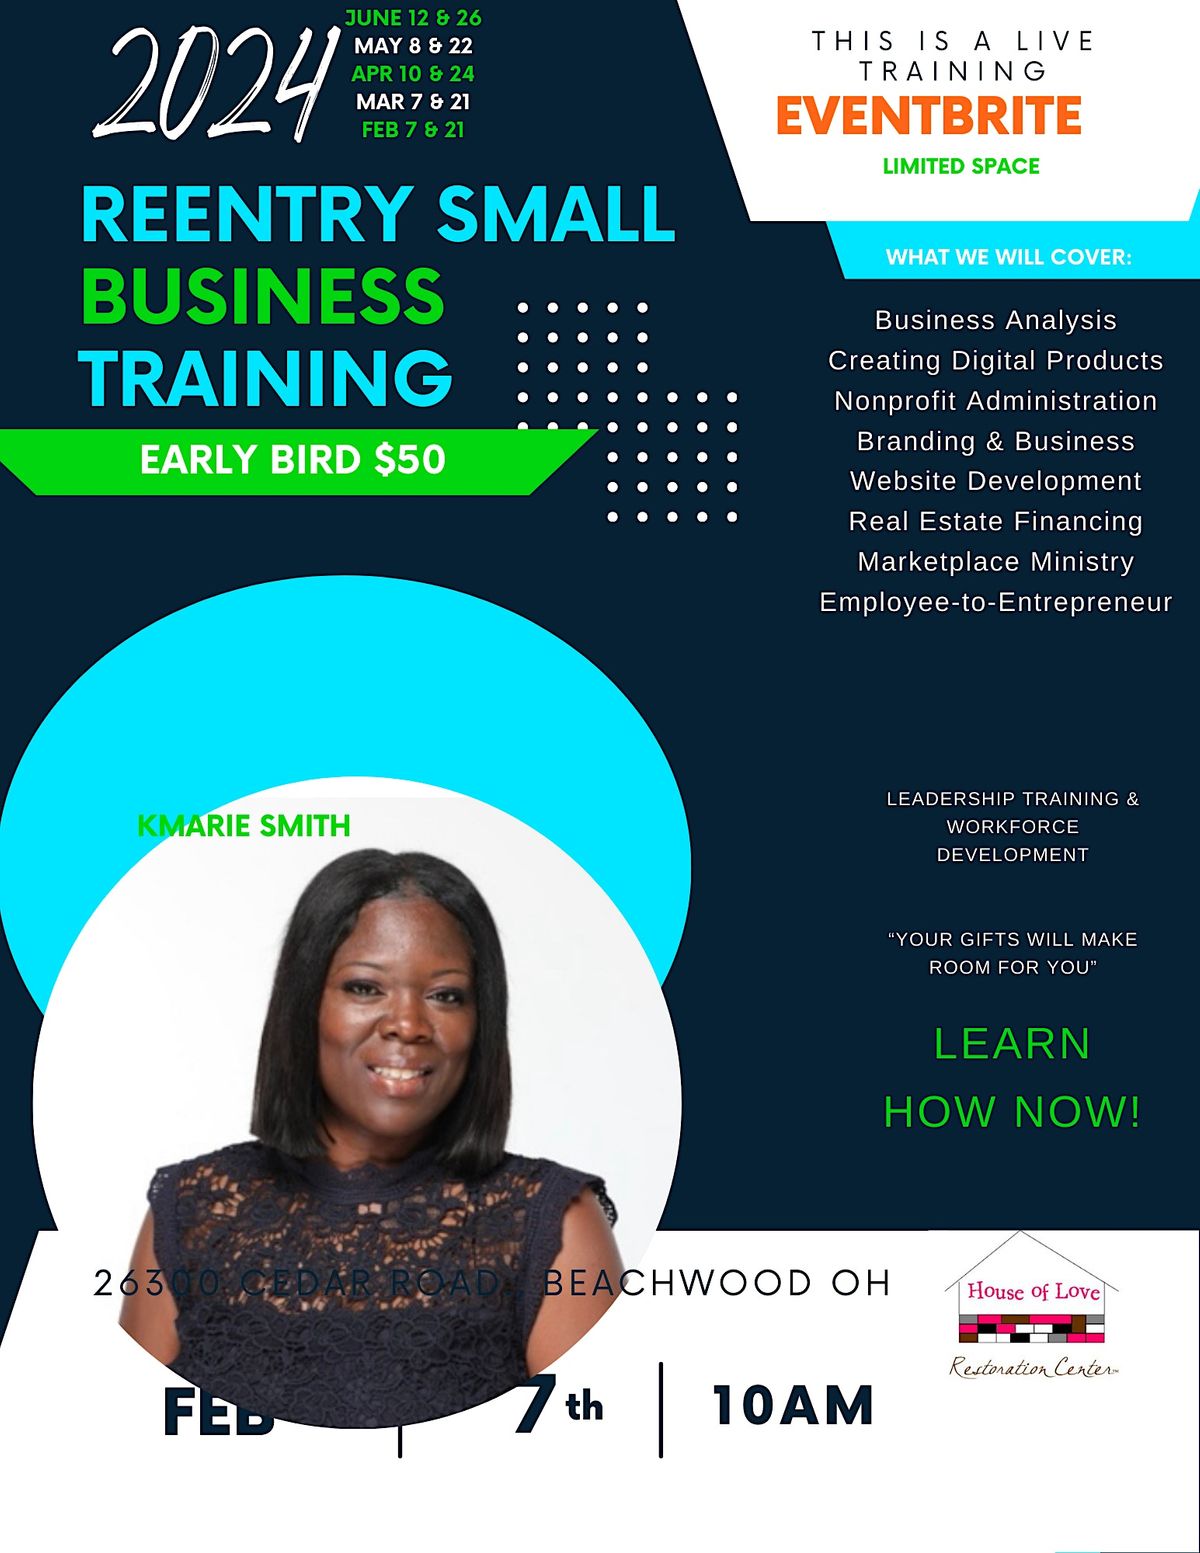 Rentry Small Business Training